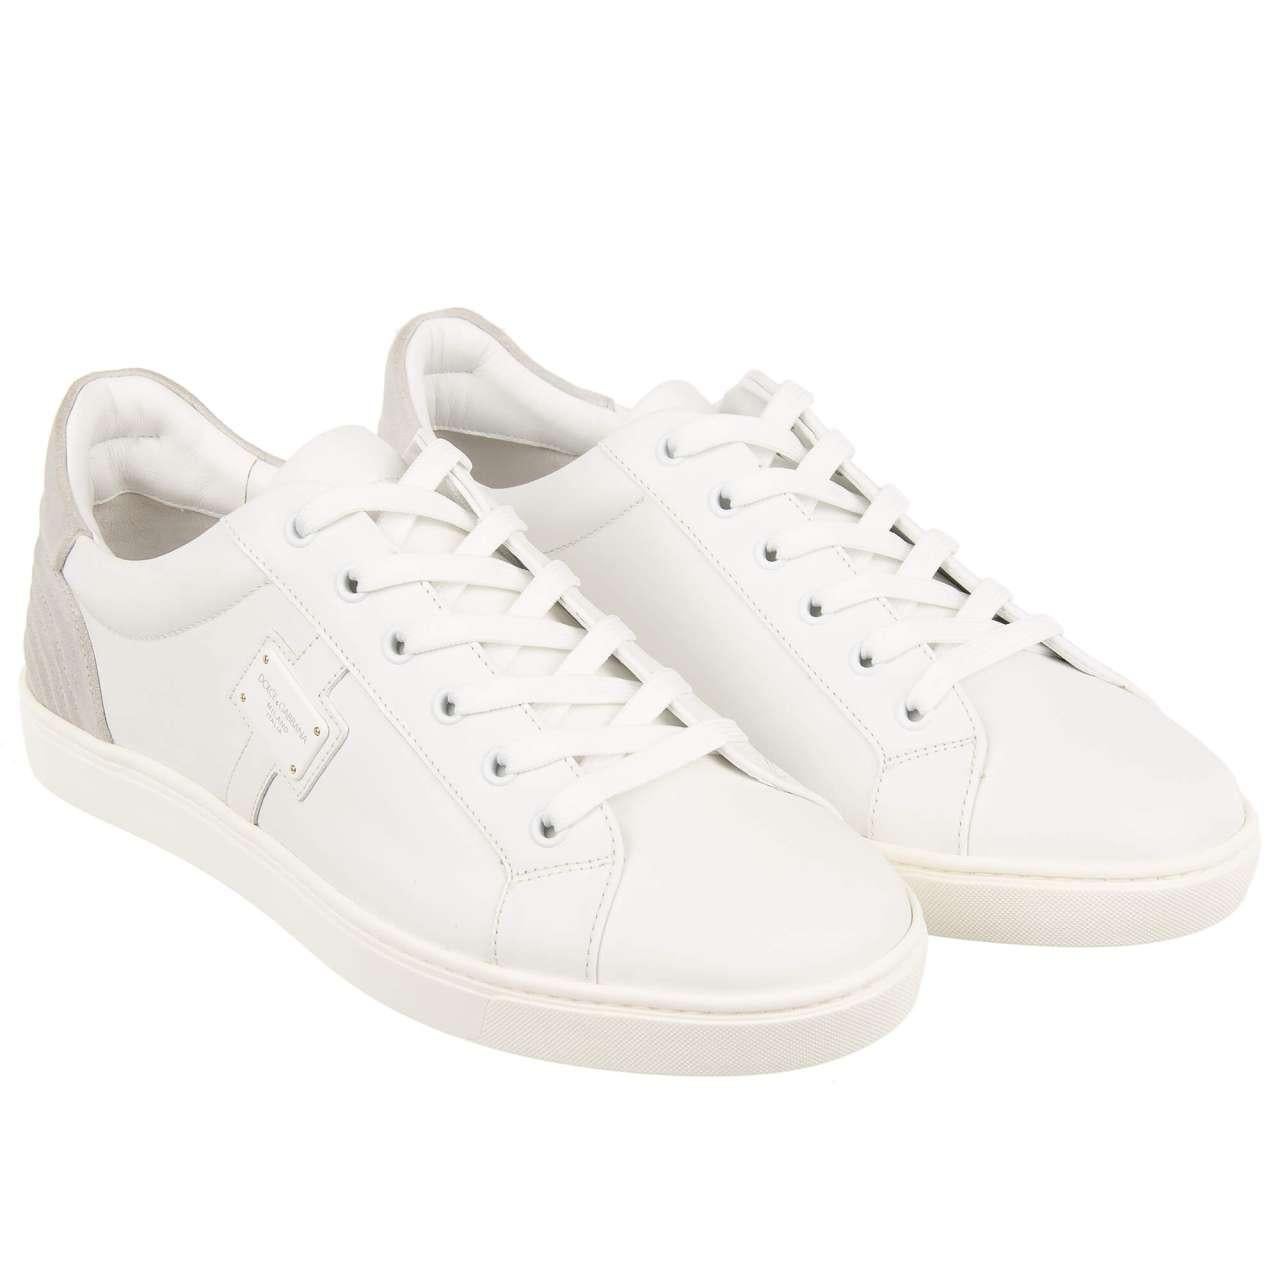 D&G Low-Top Sneaker LONDON with DG Logo Plate White Gray 41 UK 7 US 8 For Sale 3